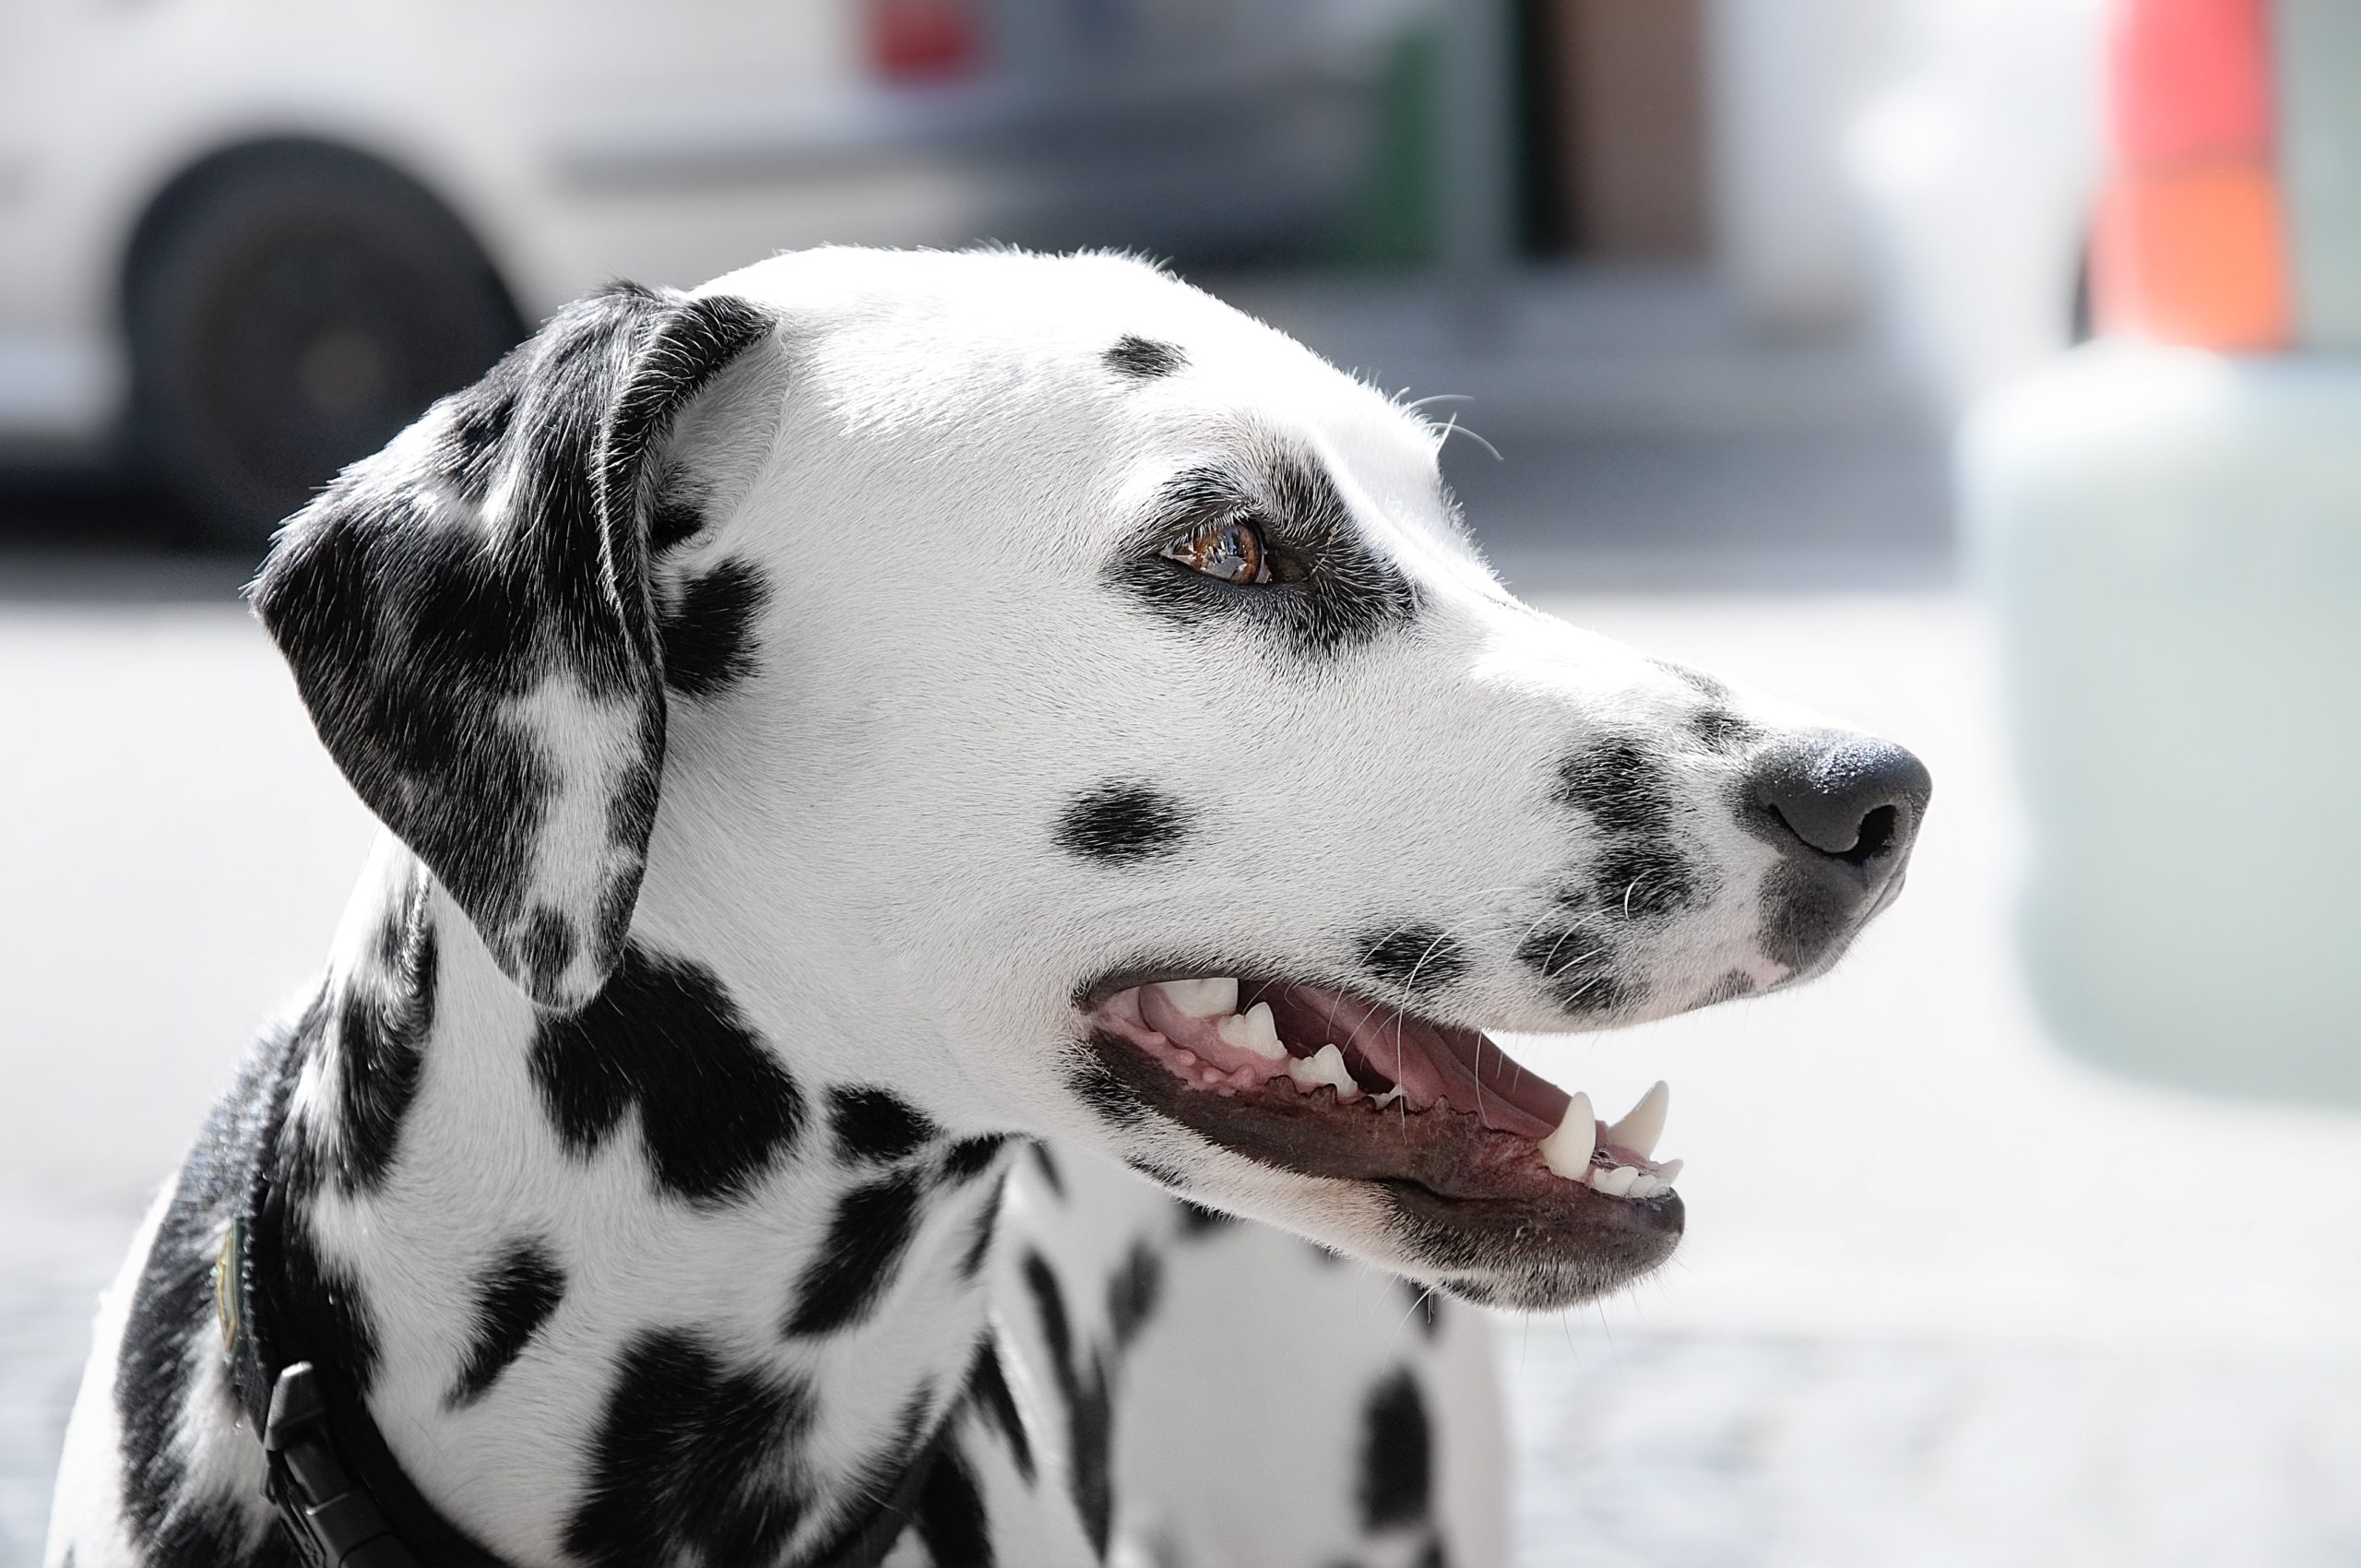 A Dalmatian dog has an endless supply of energy, even if they’re older than this Dalmation puppy pictured.